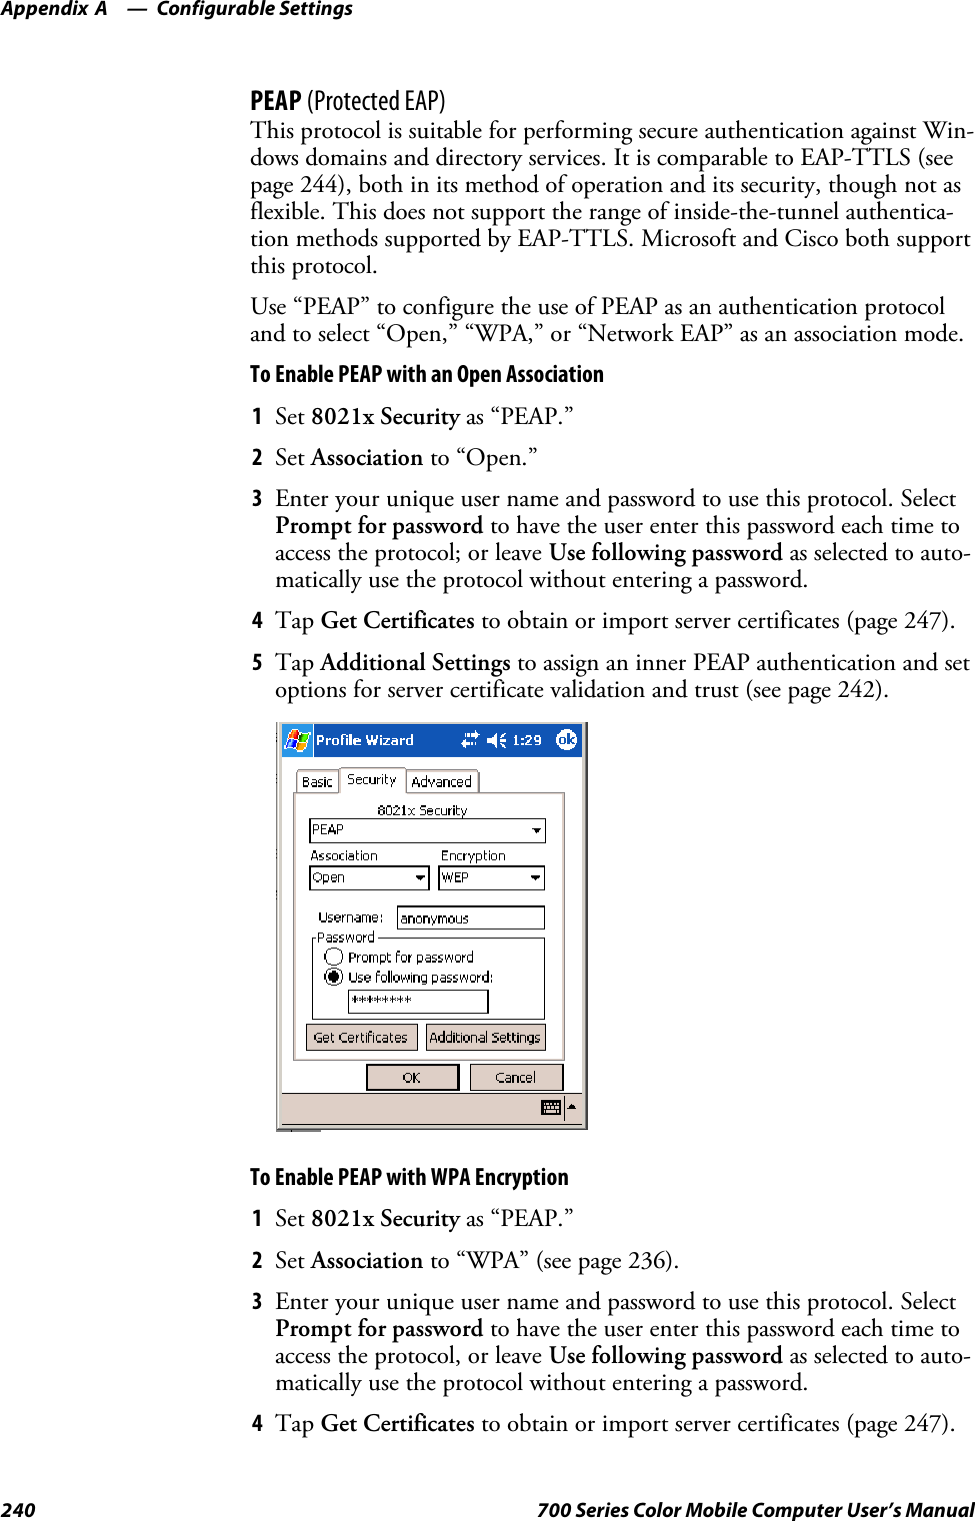 Configurable SettingsAppendix —A240 700 Series Color Mobile Computer User’s ManualPEAP (Protected EAP)This protocol is suitable for performing secure authentication against Win-dows domains and directory services. It is comparable to EAP-TTLS (seepage 244), both in its method of operation and its security, though not asflexible. This does not support the range of inside-the-tunnel authentica-tion methods supported by EAP-TTLS. Microsoft and Cisco both supportthis protocol.Use “PEAP” to configure the use of PEAP as an authentication protocoland to select “Open,” “WPA,” or “Network EAP” as an association mode.To Enable PEAP with an Open Association1Set 8021x Security as “PEAP.”2Set Association to “Open.”3Enter your unique user name and password to use this protocol. SelectPrompt for password to have the user enter this password each time toaccess the protocol; or leave Use following password as selected to auto-matically use the protocol without entering a password.4Tap Get Certificates to obtain or import server certificates (page 247).5Tap Additional Settings to assign an inner PEAP authentication and setoptions for server certificate validation and trust (see page 242).To Enable PEAP with WPA Encryption1Set 8021x Security as “PEAP.”2Set Association to “WPA” (see page 236).3Enter your unique user name and password to use this protocol. SelectPrompt for password to have the user enter this password each time toaccess the protocol, or leave Use following password as selected to auto-matically use the protocol without entering a password.4Tap Get Certificates to obtain or import server certificates (page 247).